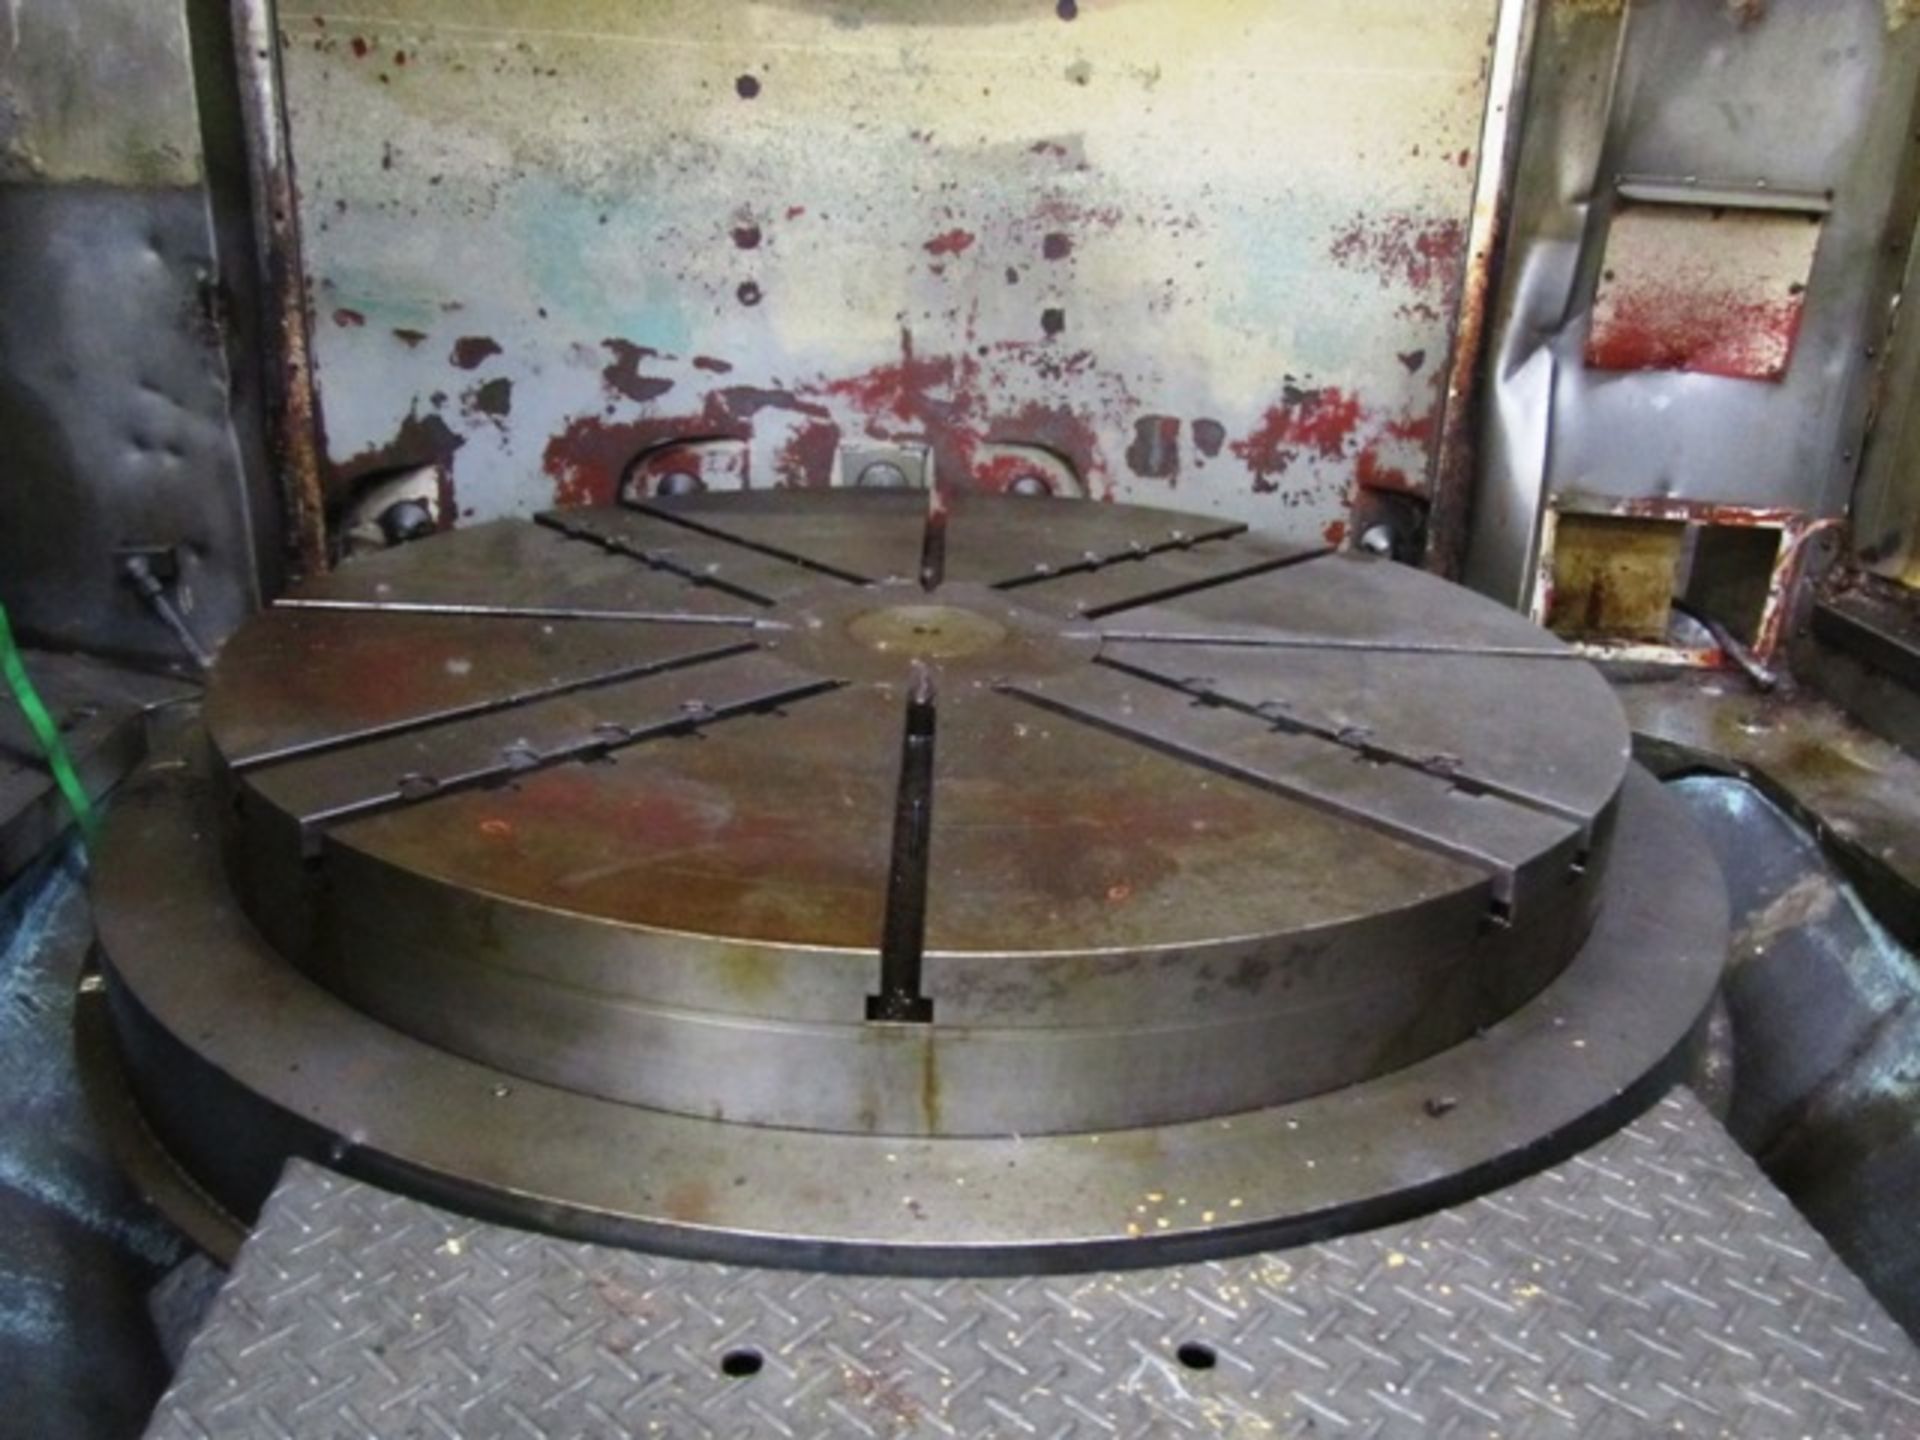 Toshiba TMD-13 CNC Vertical Boring Mill with 24-ATC, 49.18'' Table, 4-Jaw Chuck, 62.99'' Swing, 43. - Image 2 of 4